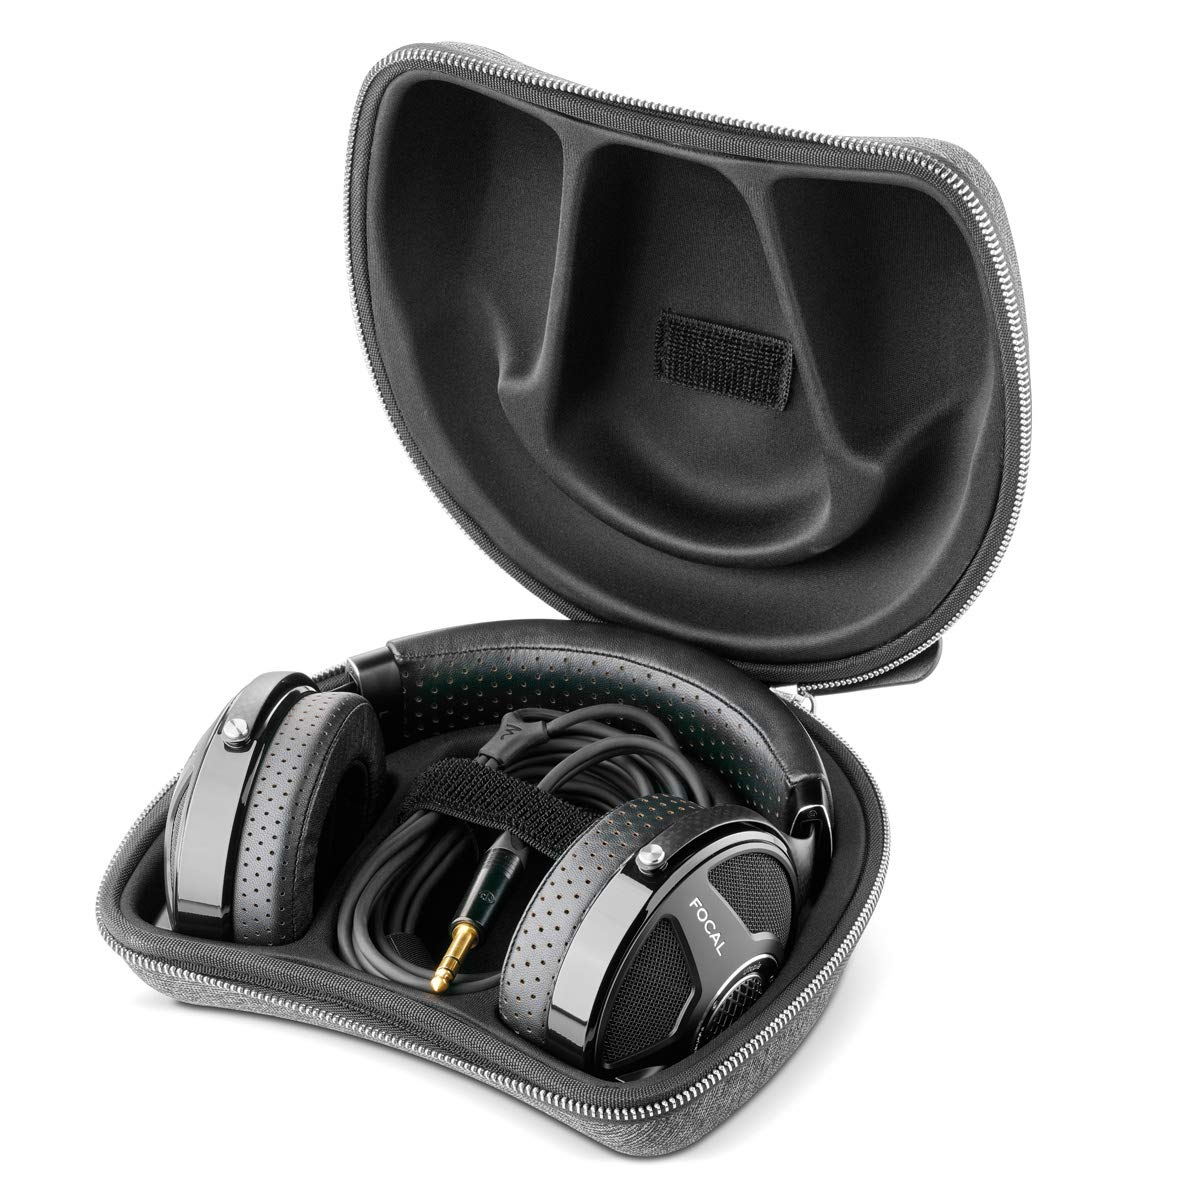 Focal CQA1012 Hard-Shell Carrying Case for Elear, Clear & Utopia